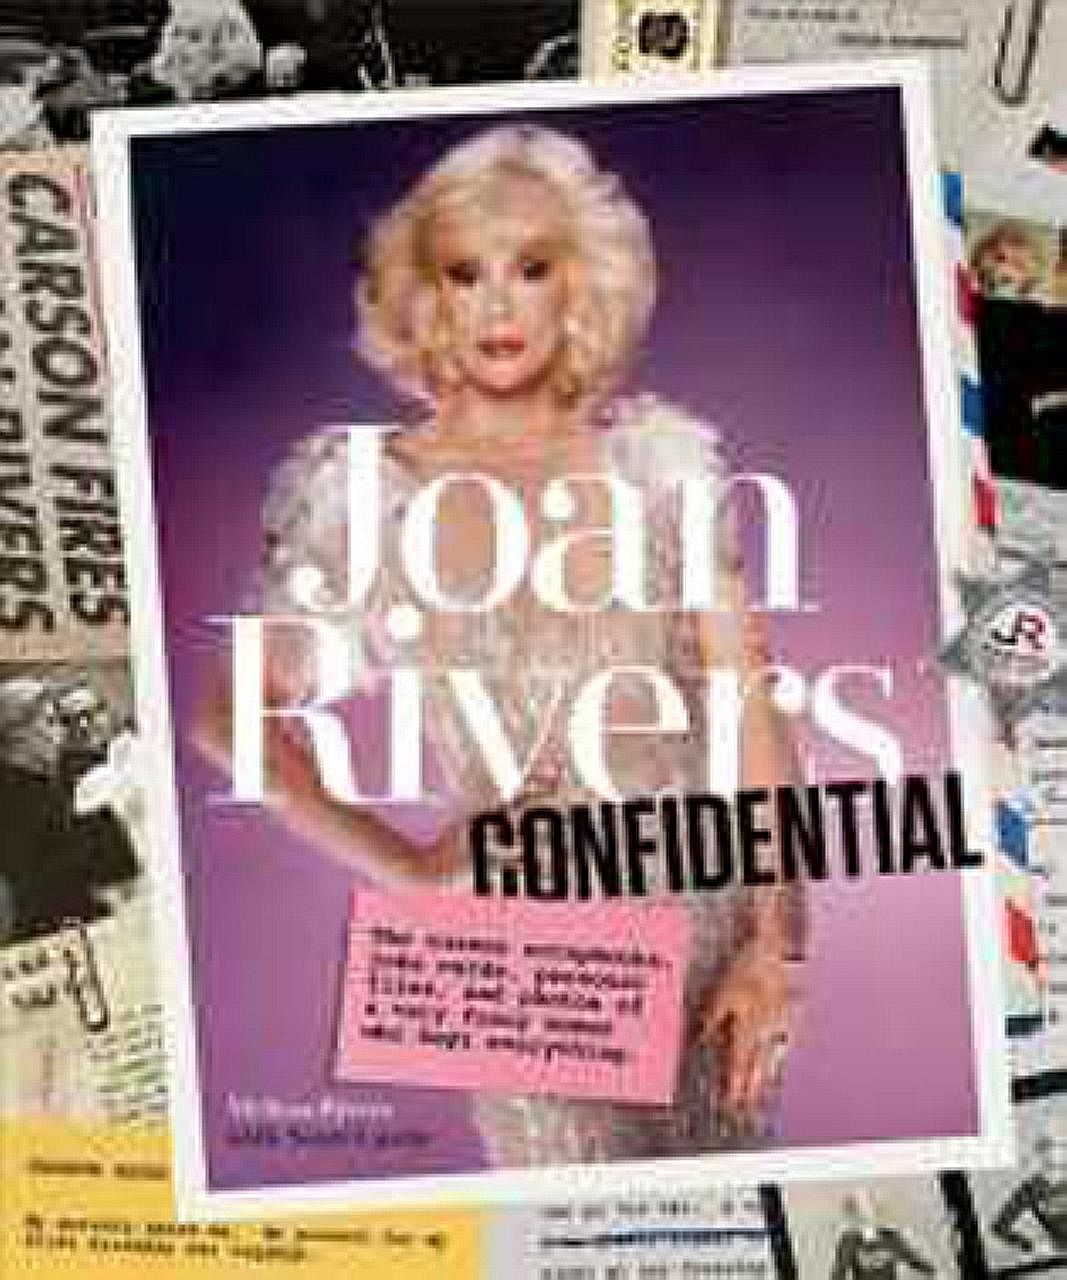 Joan Rivers Confidential (above) is a humorous look at the life of the late comedienne (left).